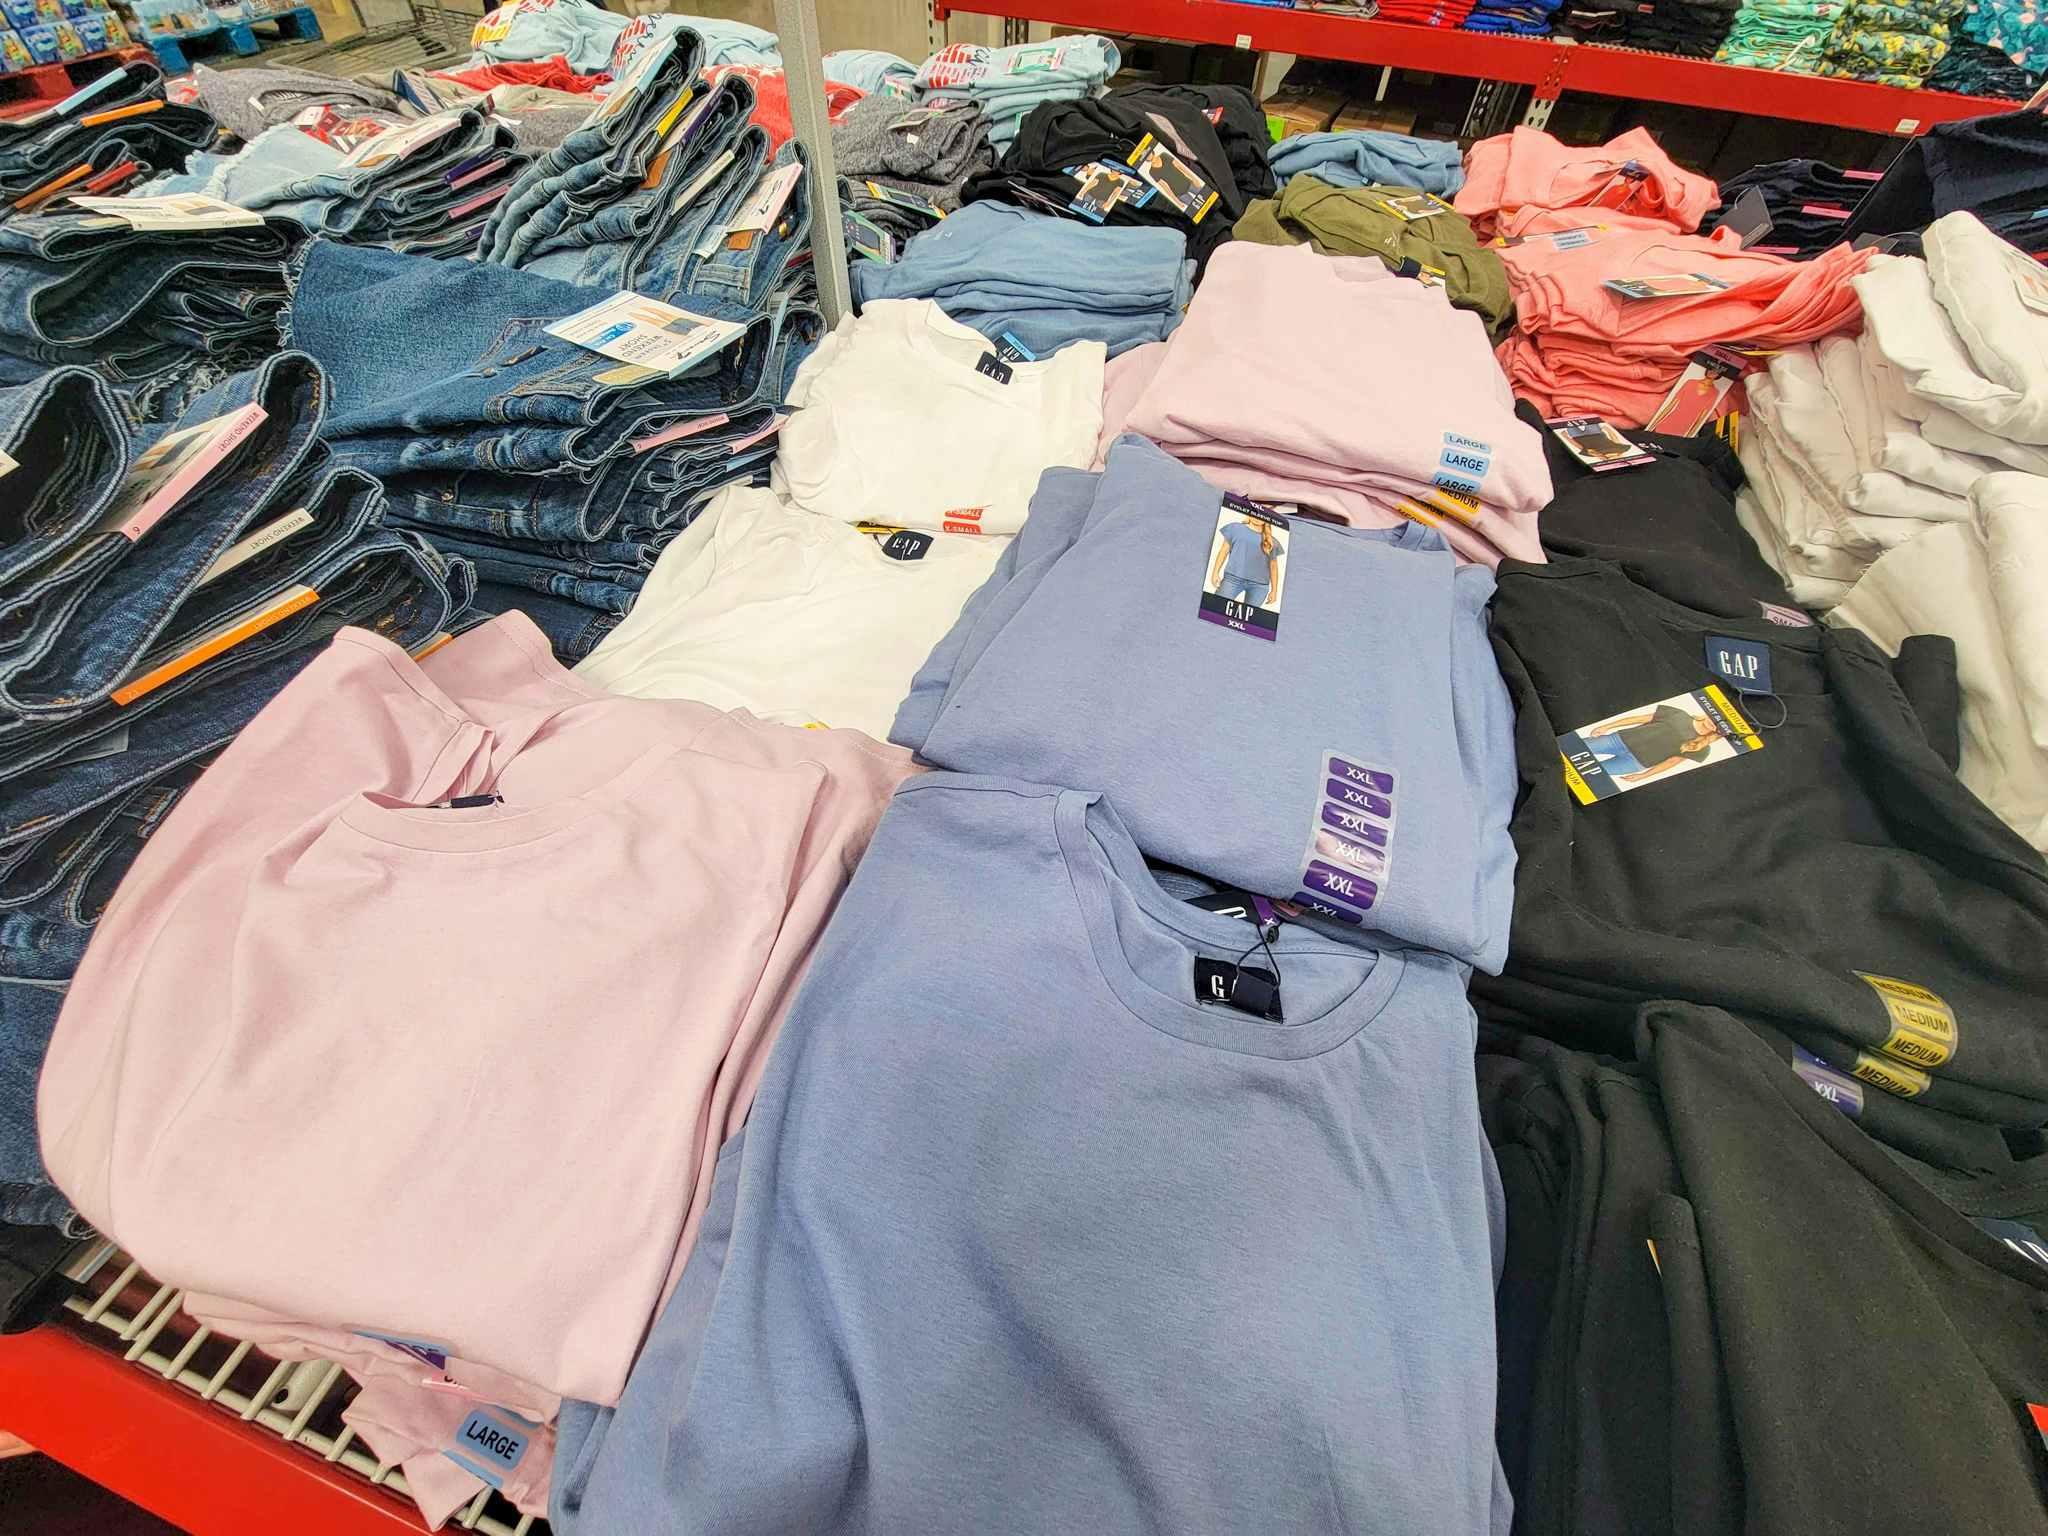 table with white, pink, and blue shirts